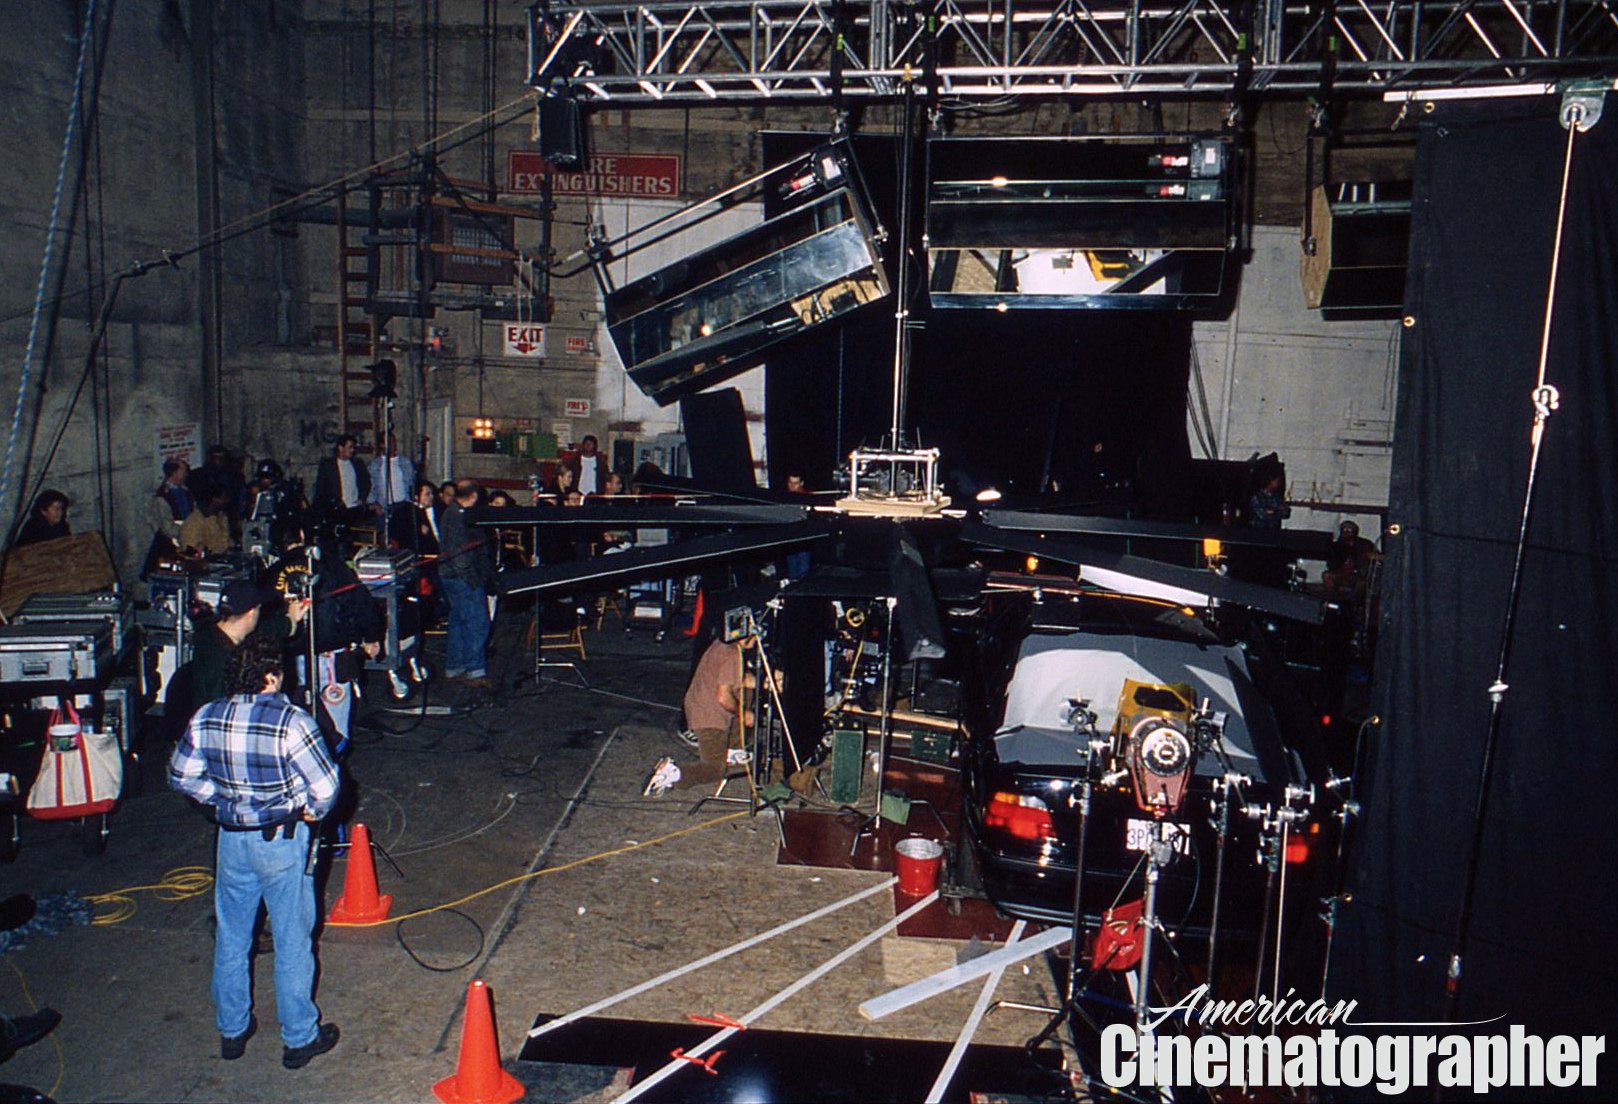 Another view of the car rig built by gaffer Claudio Miranda, who noted that it was one of the most expensive he'd ever constructed. They primarily employed 8' Kino Flo tubes projecting from a 2' center hub, spun by a brushless motor.